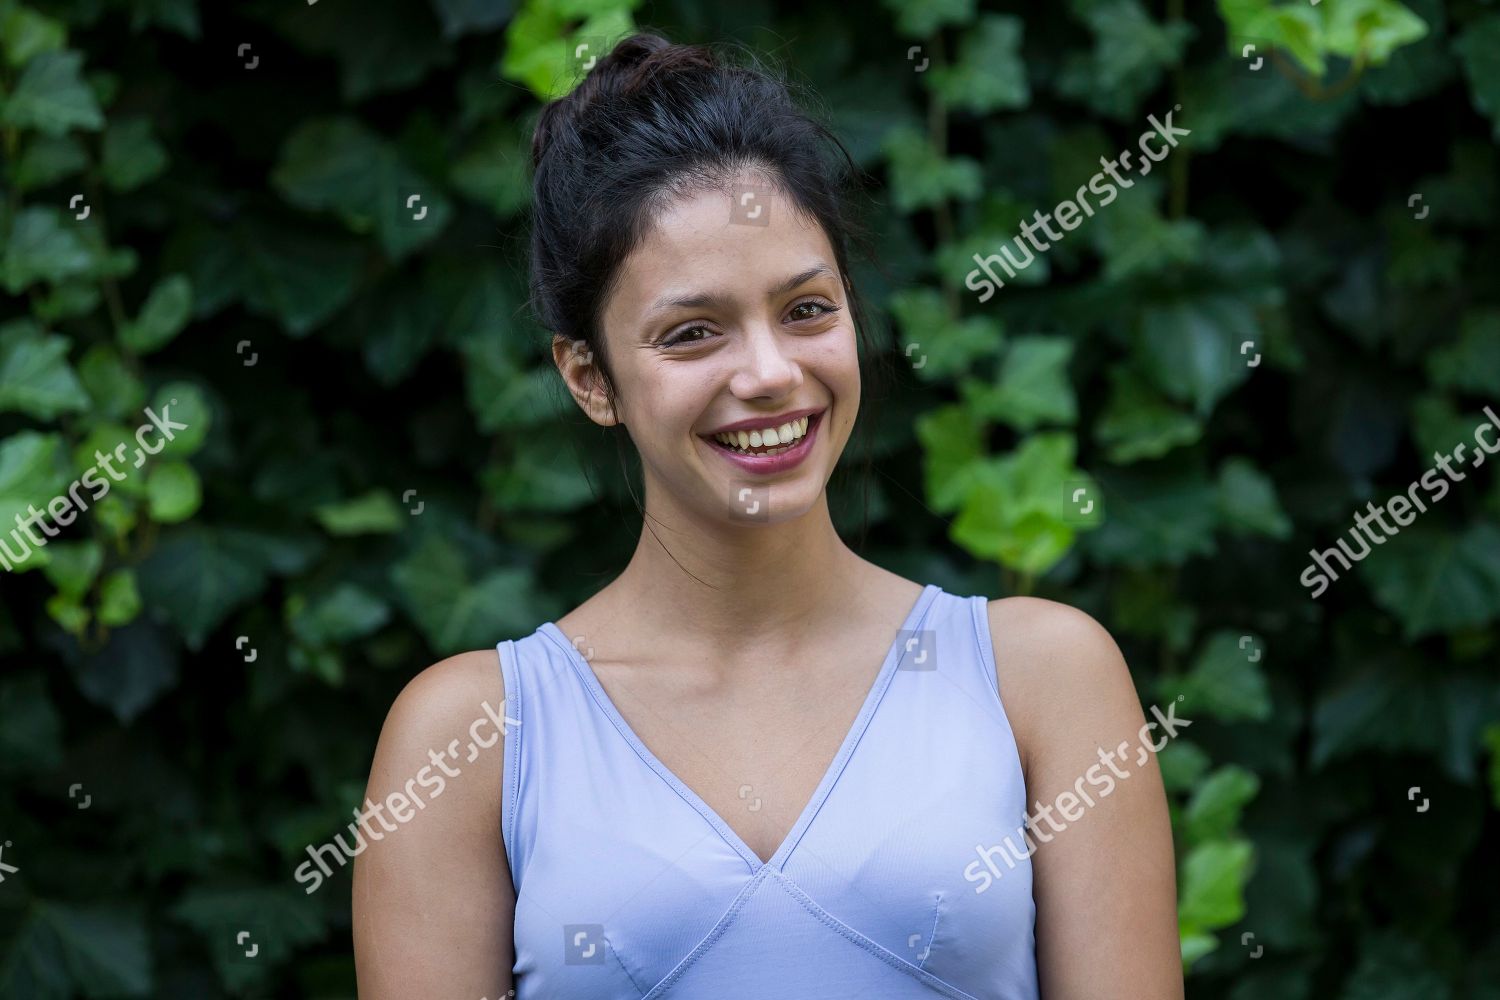 French actress Noee Abita poses during photocall Editorial Stock Photo -  Stock Image | Shutterstock